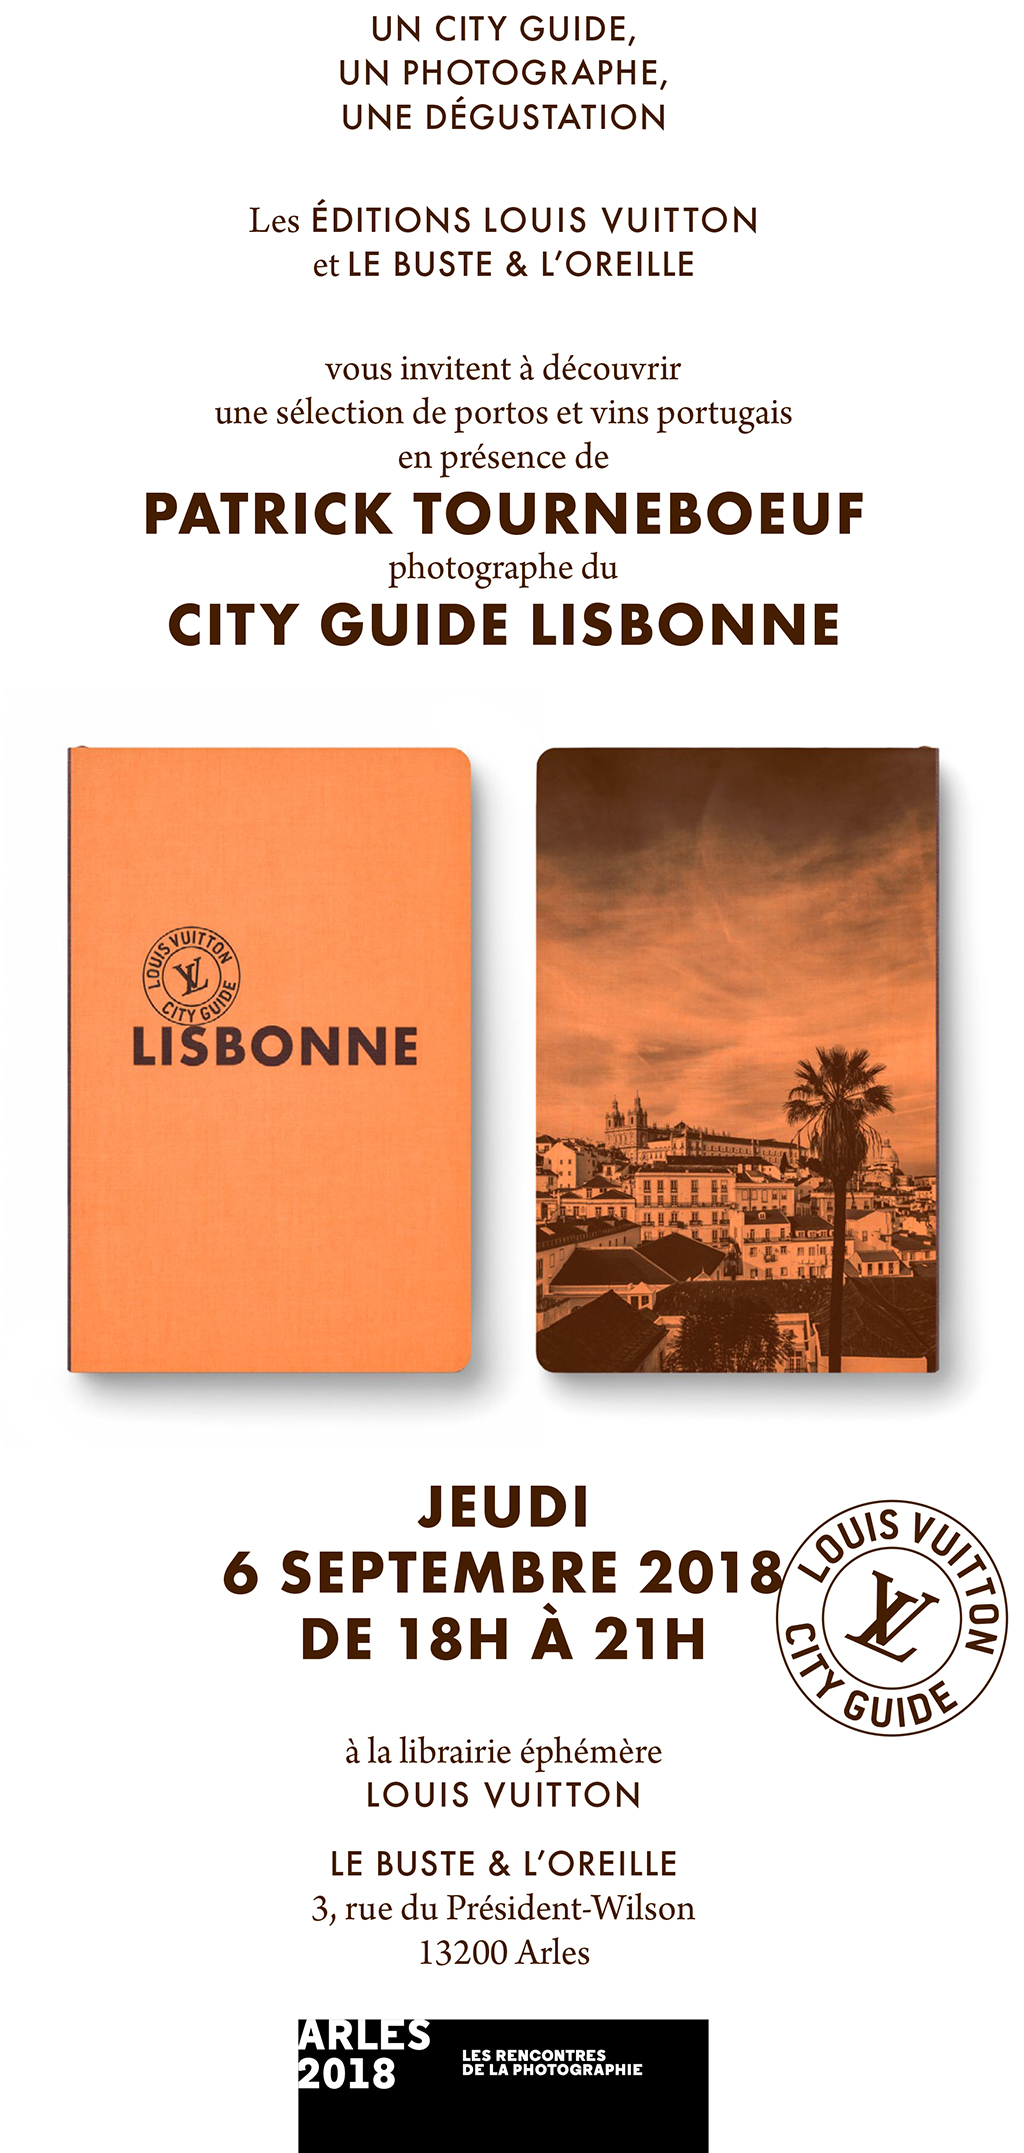 Louis Vuitton publishes collector's edition of Arles City Guide in